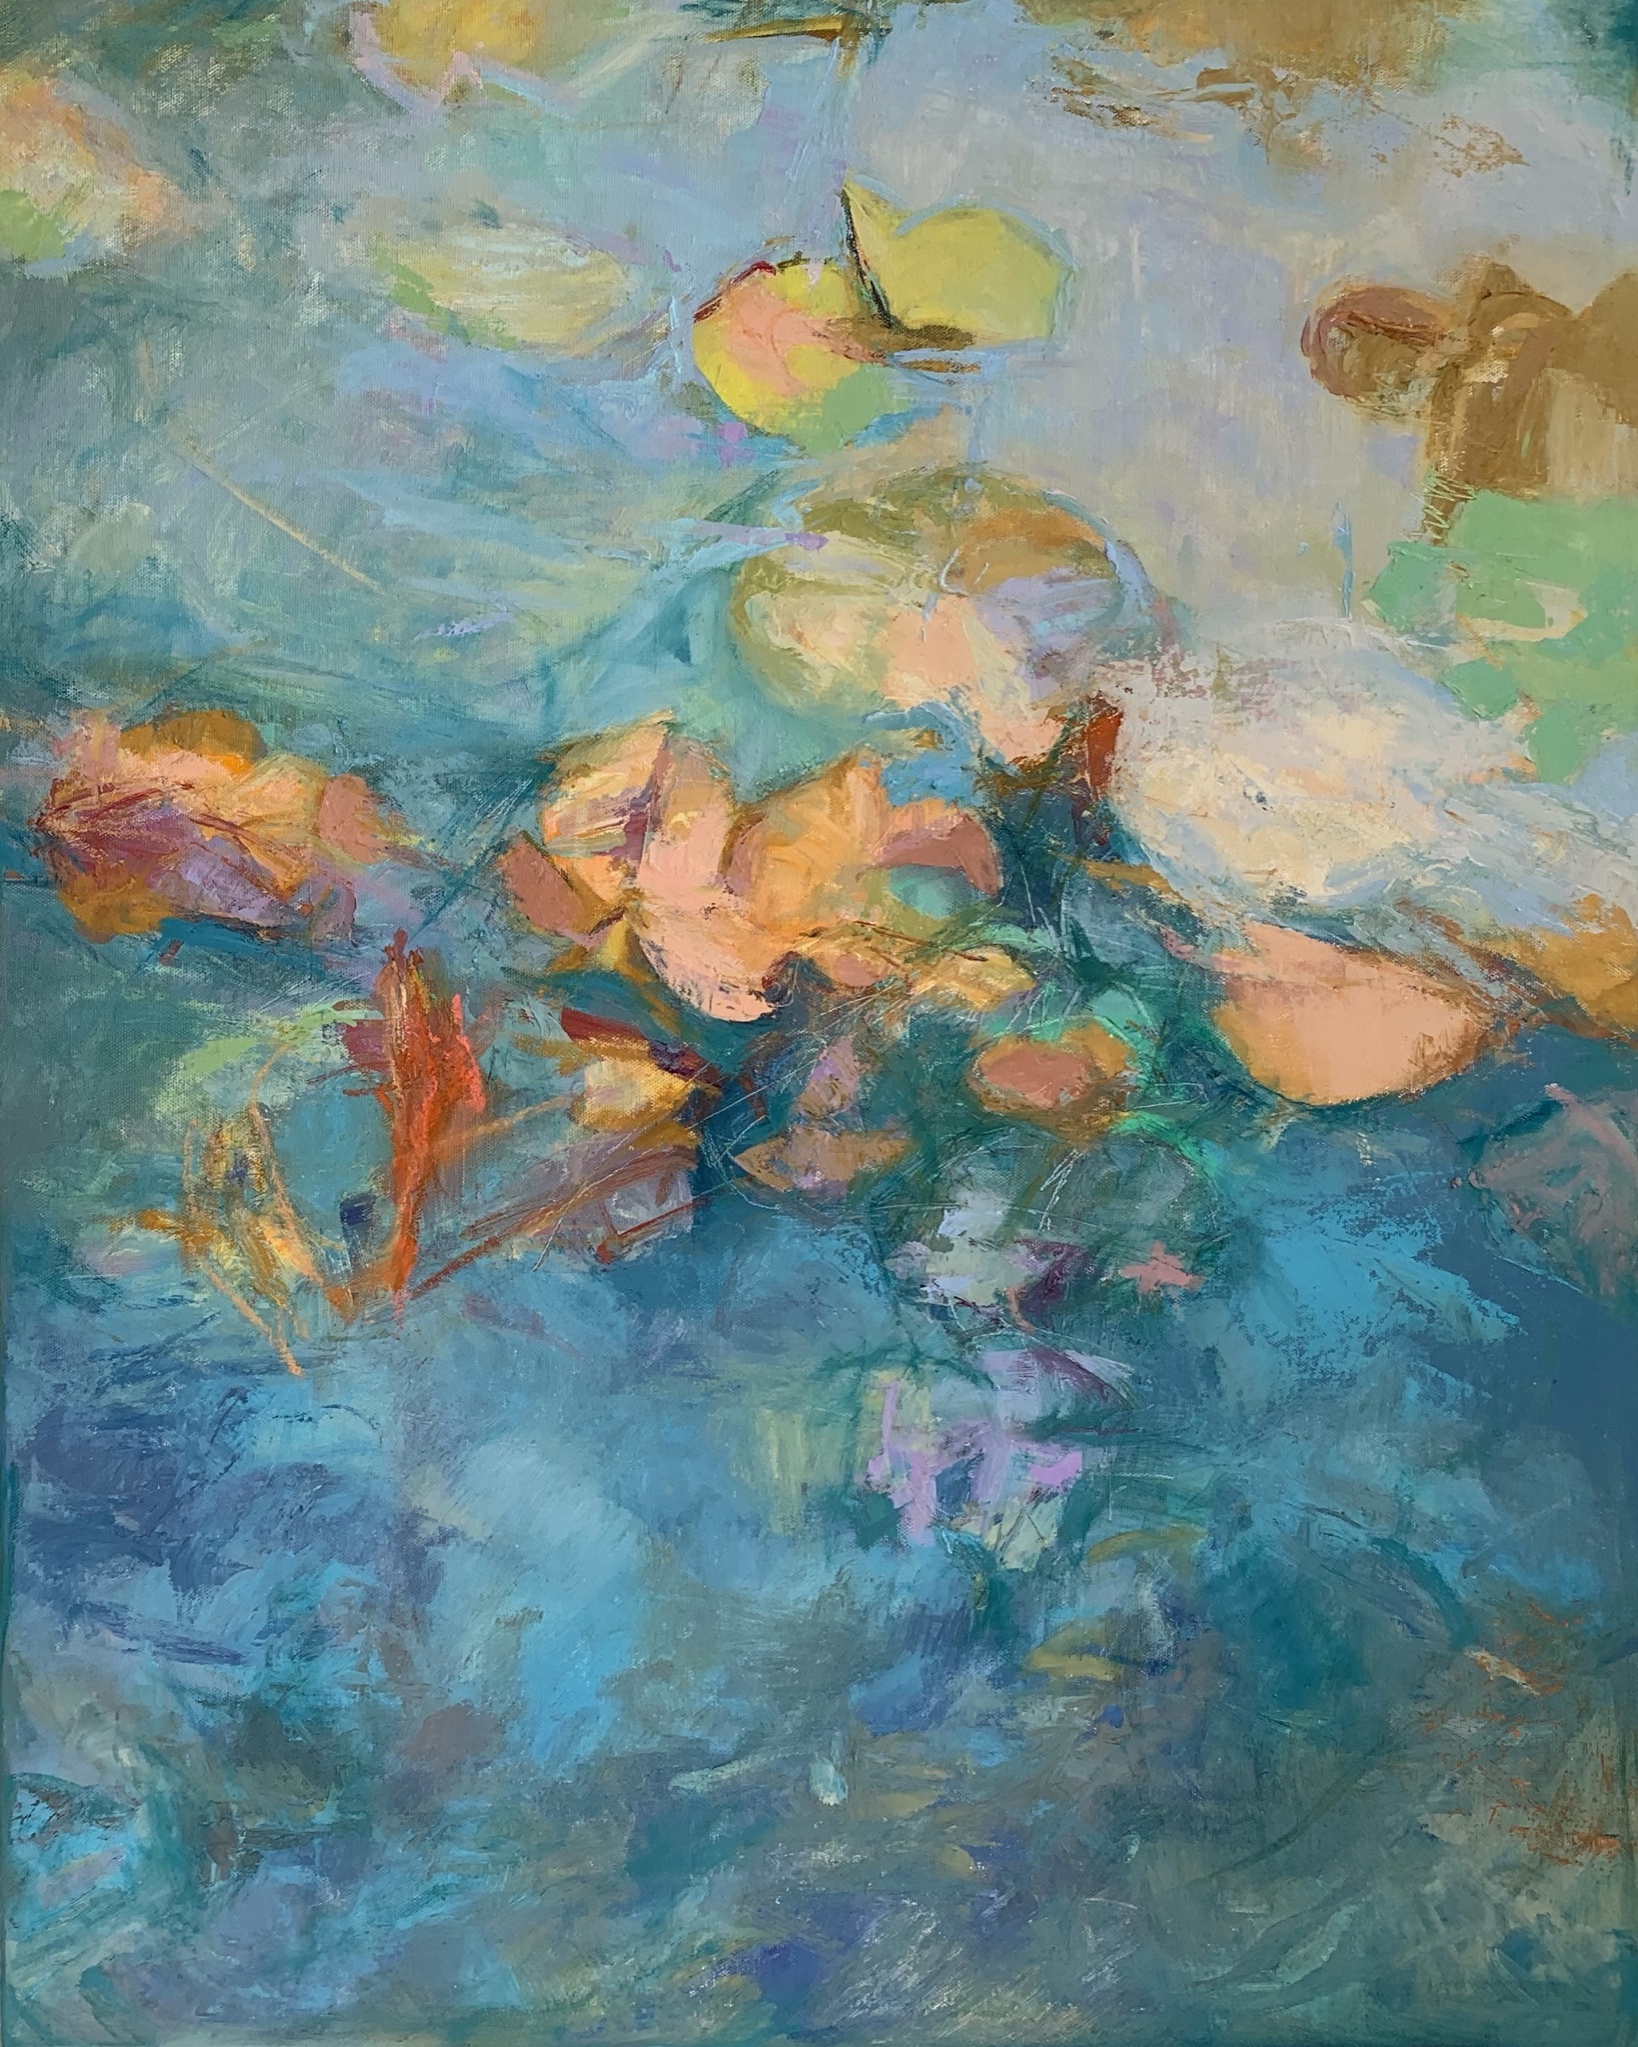 Best Floral -Marcia Holmes, "Rainbow Water Lilies II," oil on canvas, 30 x 24 in. Private Collection